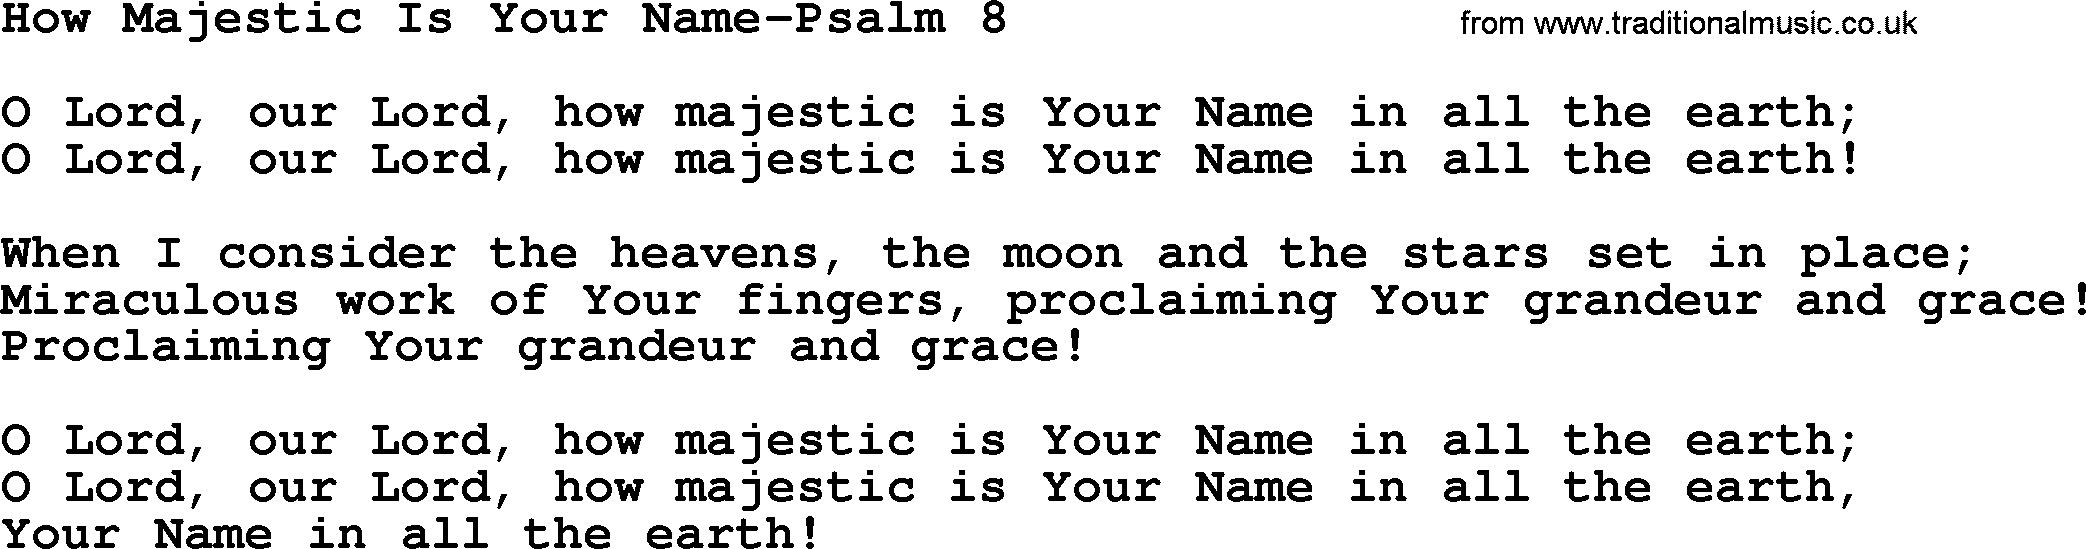 Hymns from the Psalms, Hymn: How Majestic Is Your Name-Psalm 8, lyrics with PDF